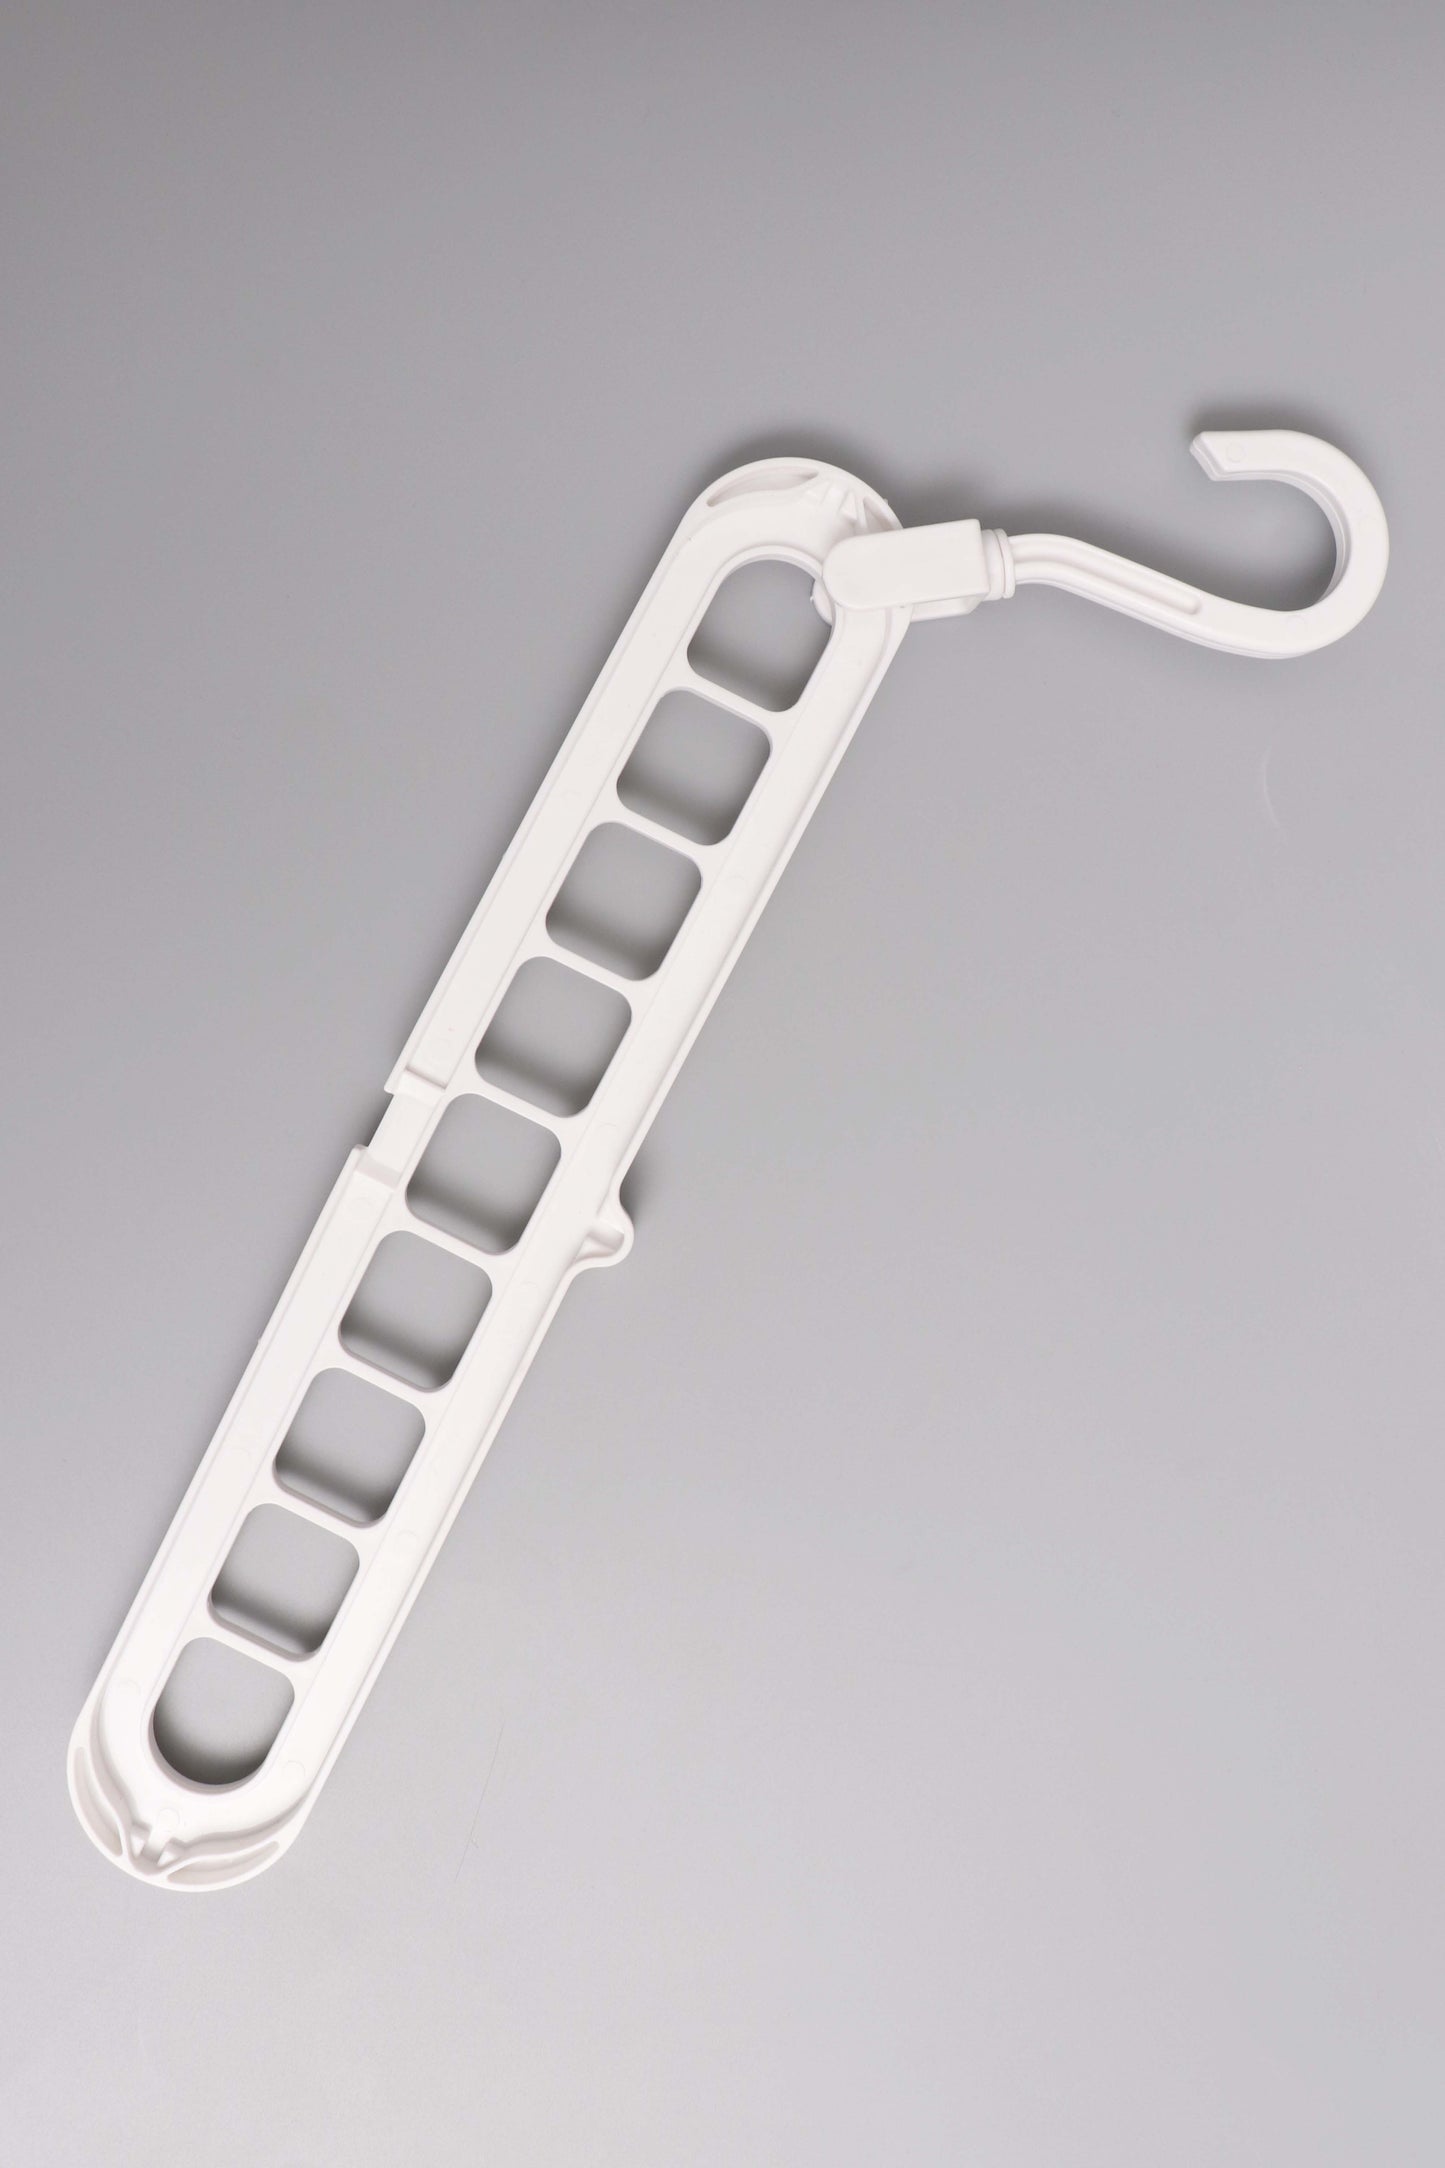 9 Hole Multi Hanger pack of 12 only 799